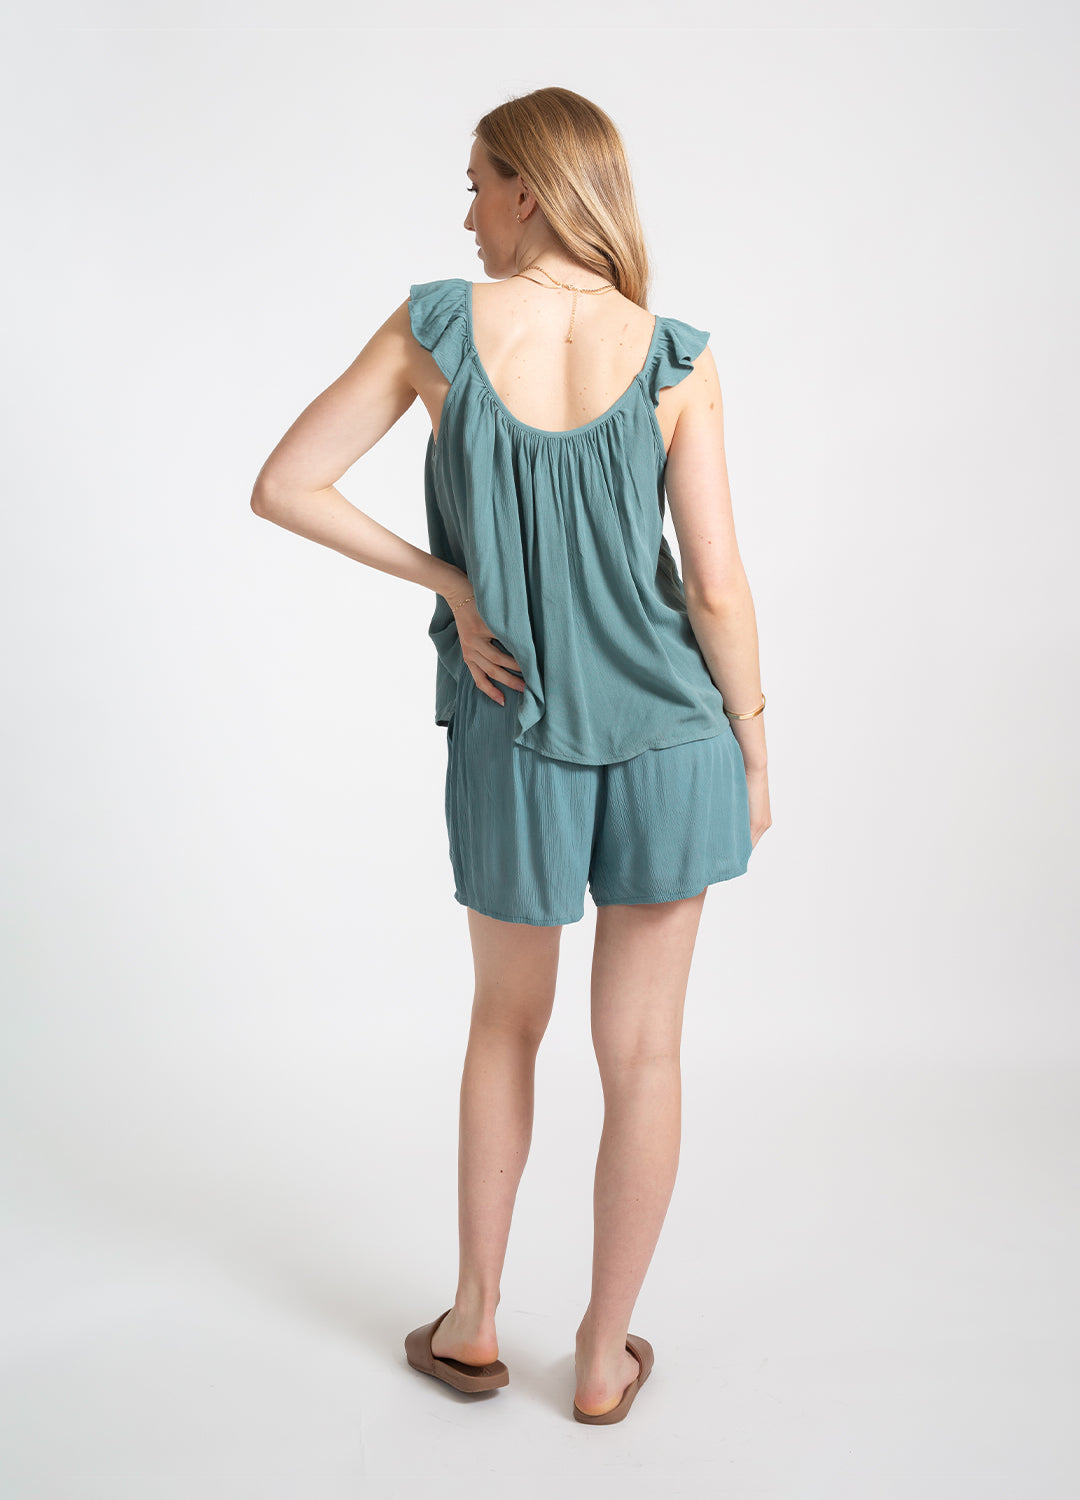 Koy Resort Miami Ruffle Strap Tank Top in a beautiful blue jade colour made from easy wearing crinkle rayon at Inner Beach Co, Toronto, Ontario, Canada